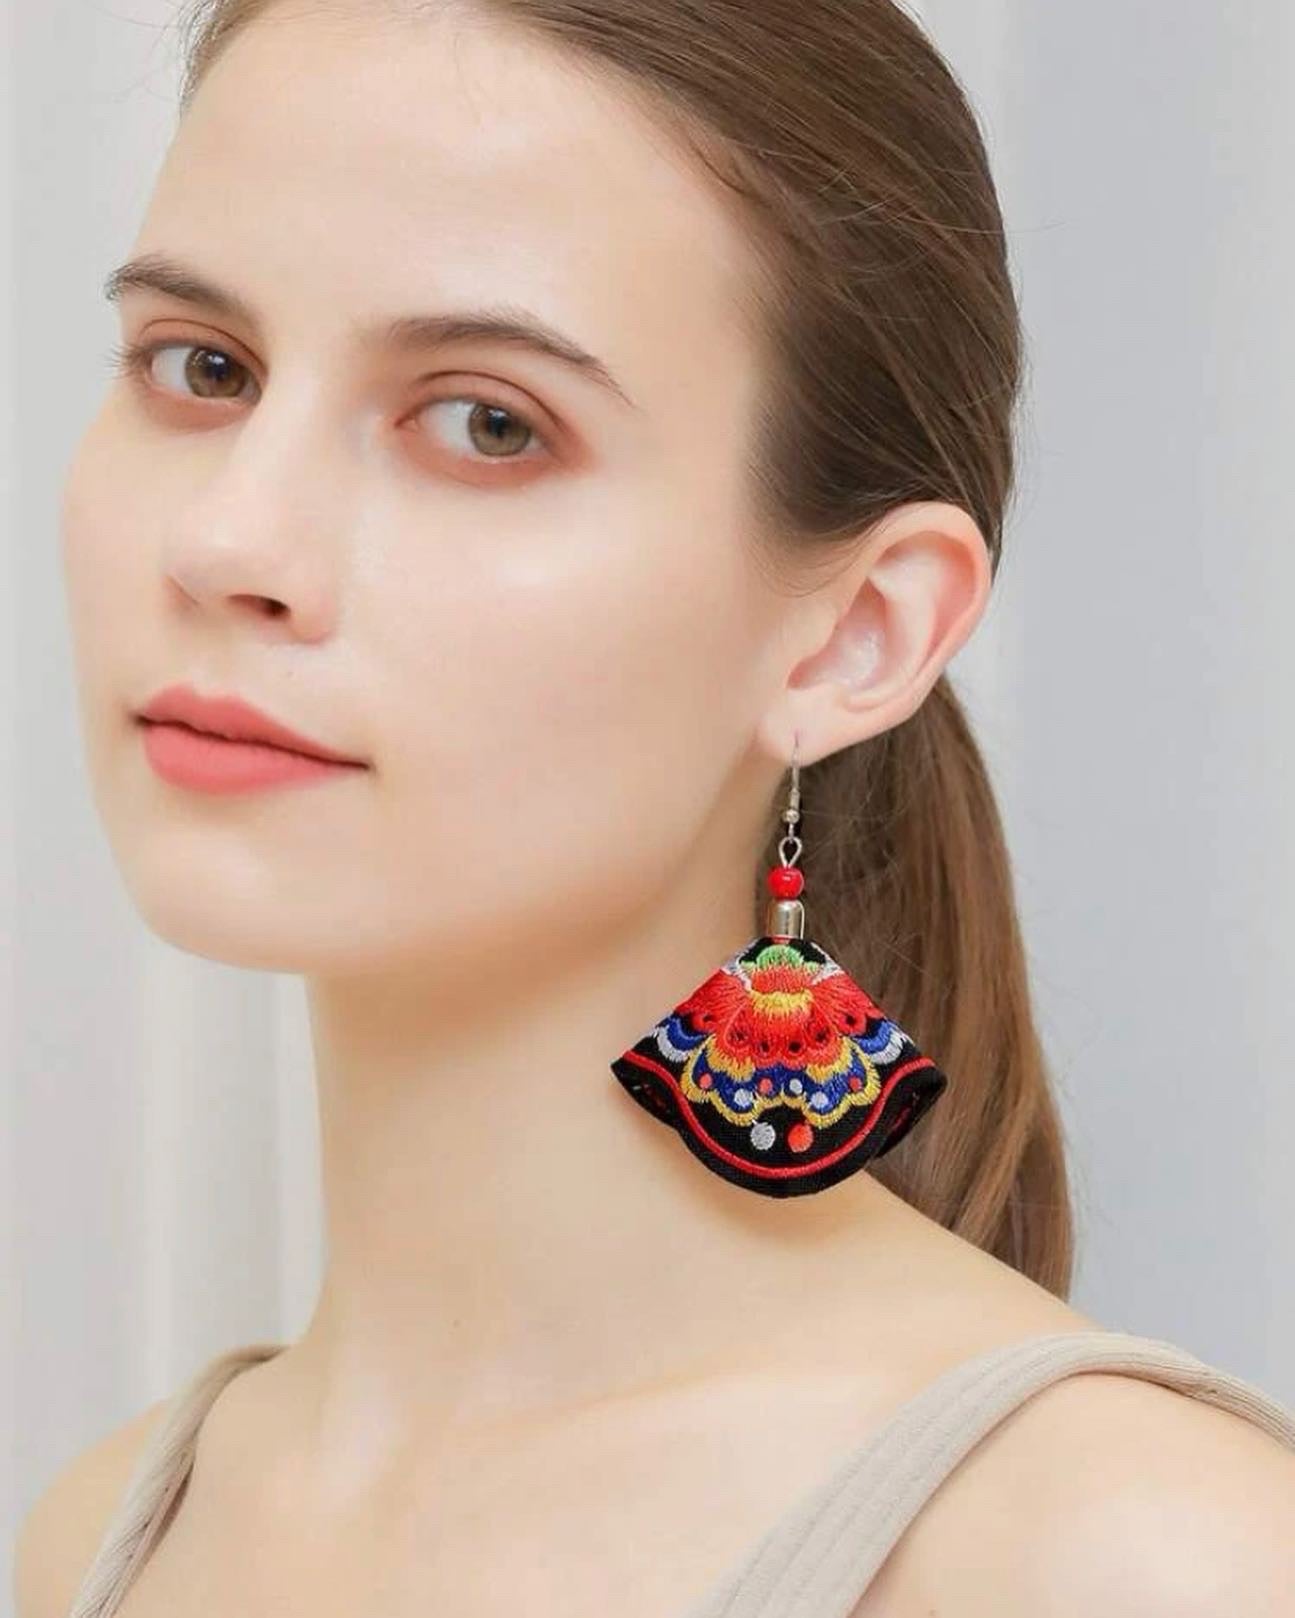 Flower embroidered drop earrings.